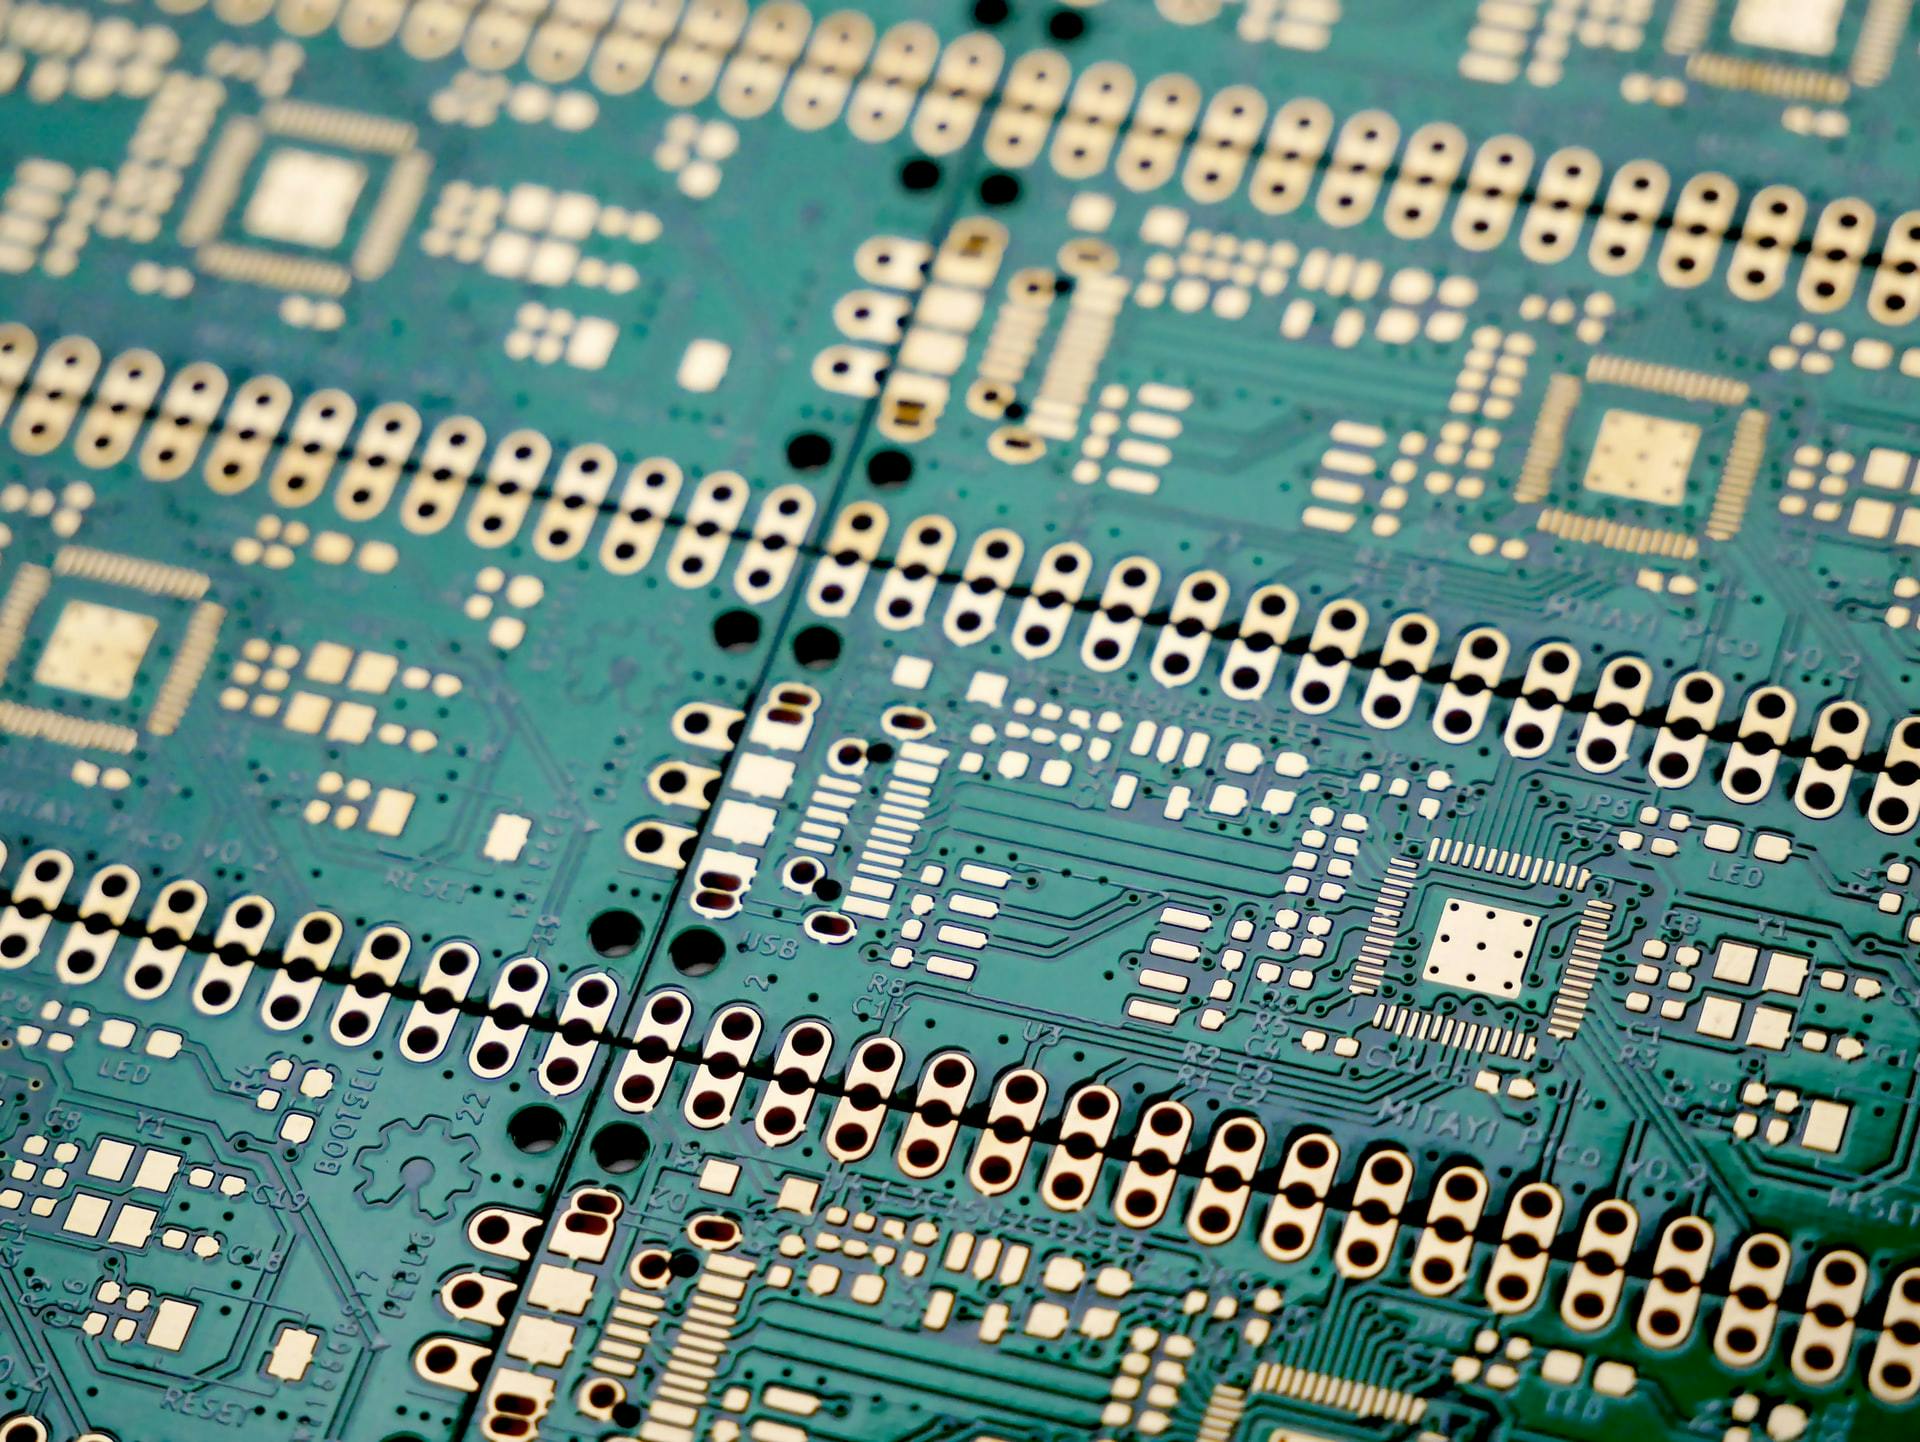 A close-up shot of computer circuitry, where the board is green and various metallic elements appear yellowish-gold